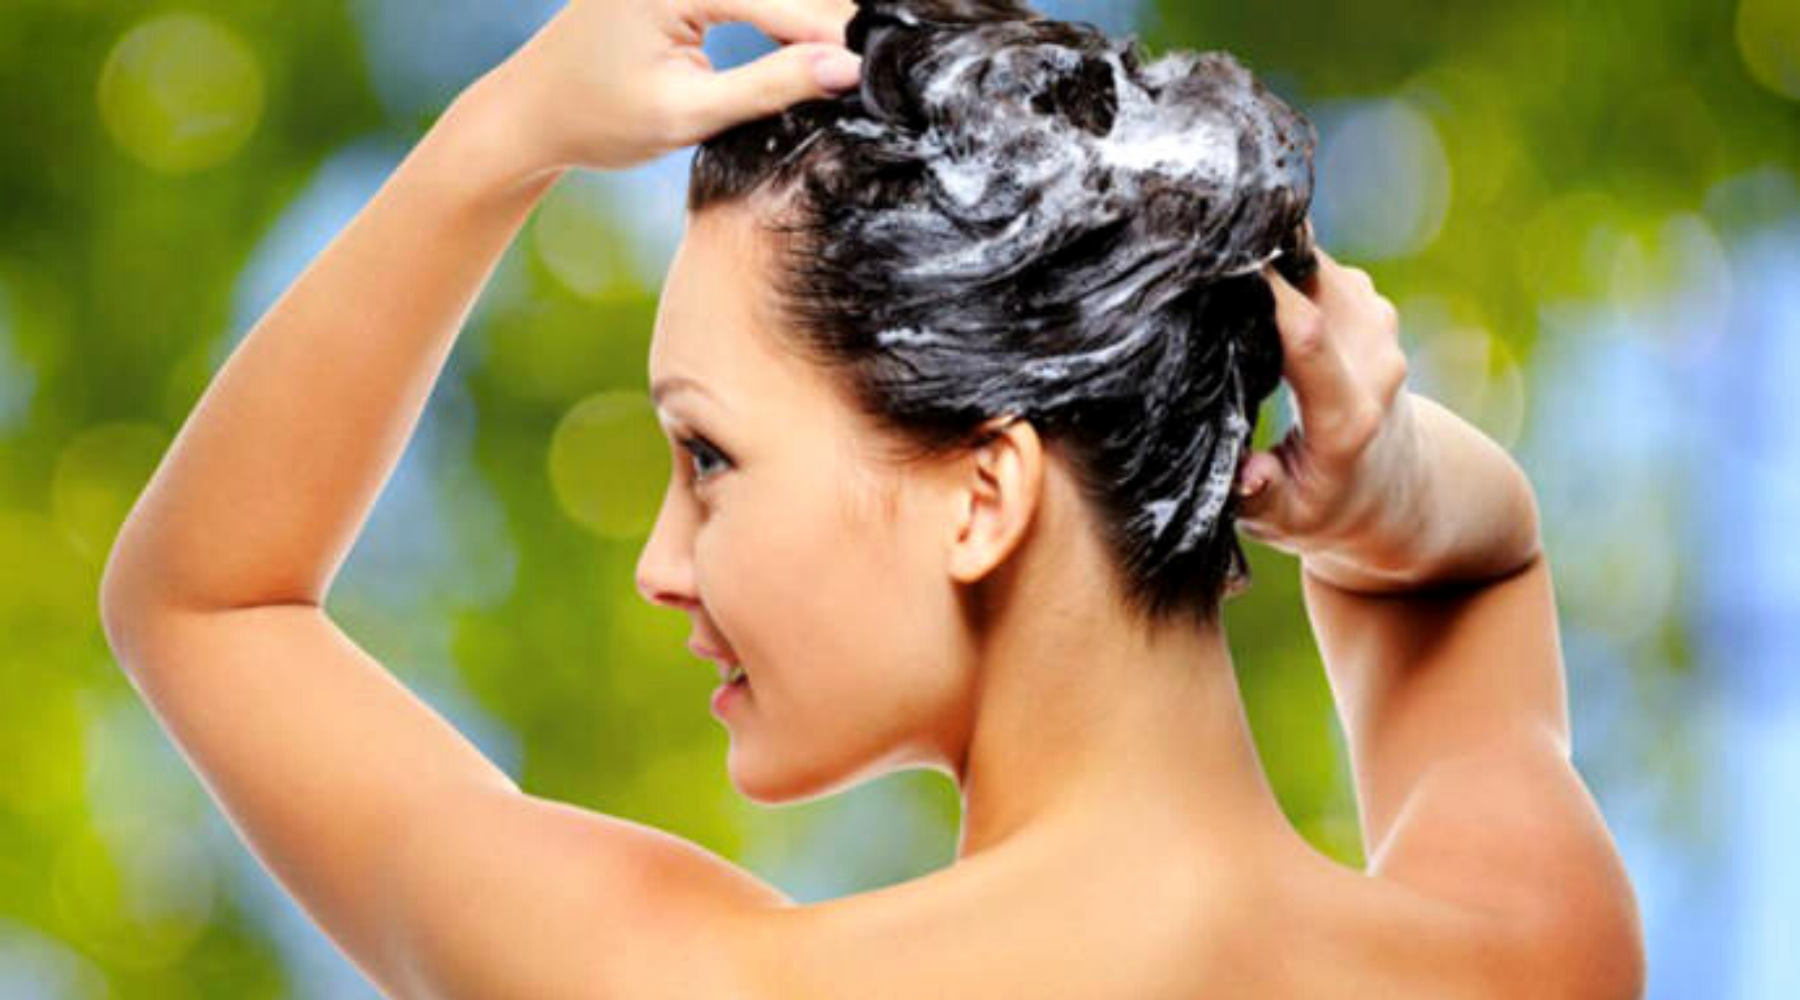 How To Get Rid Of Dandruff